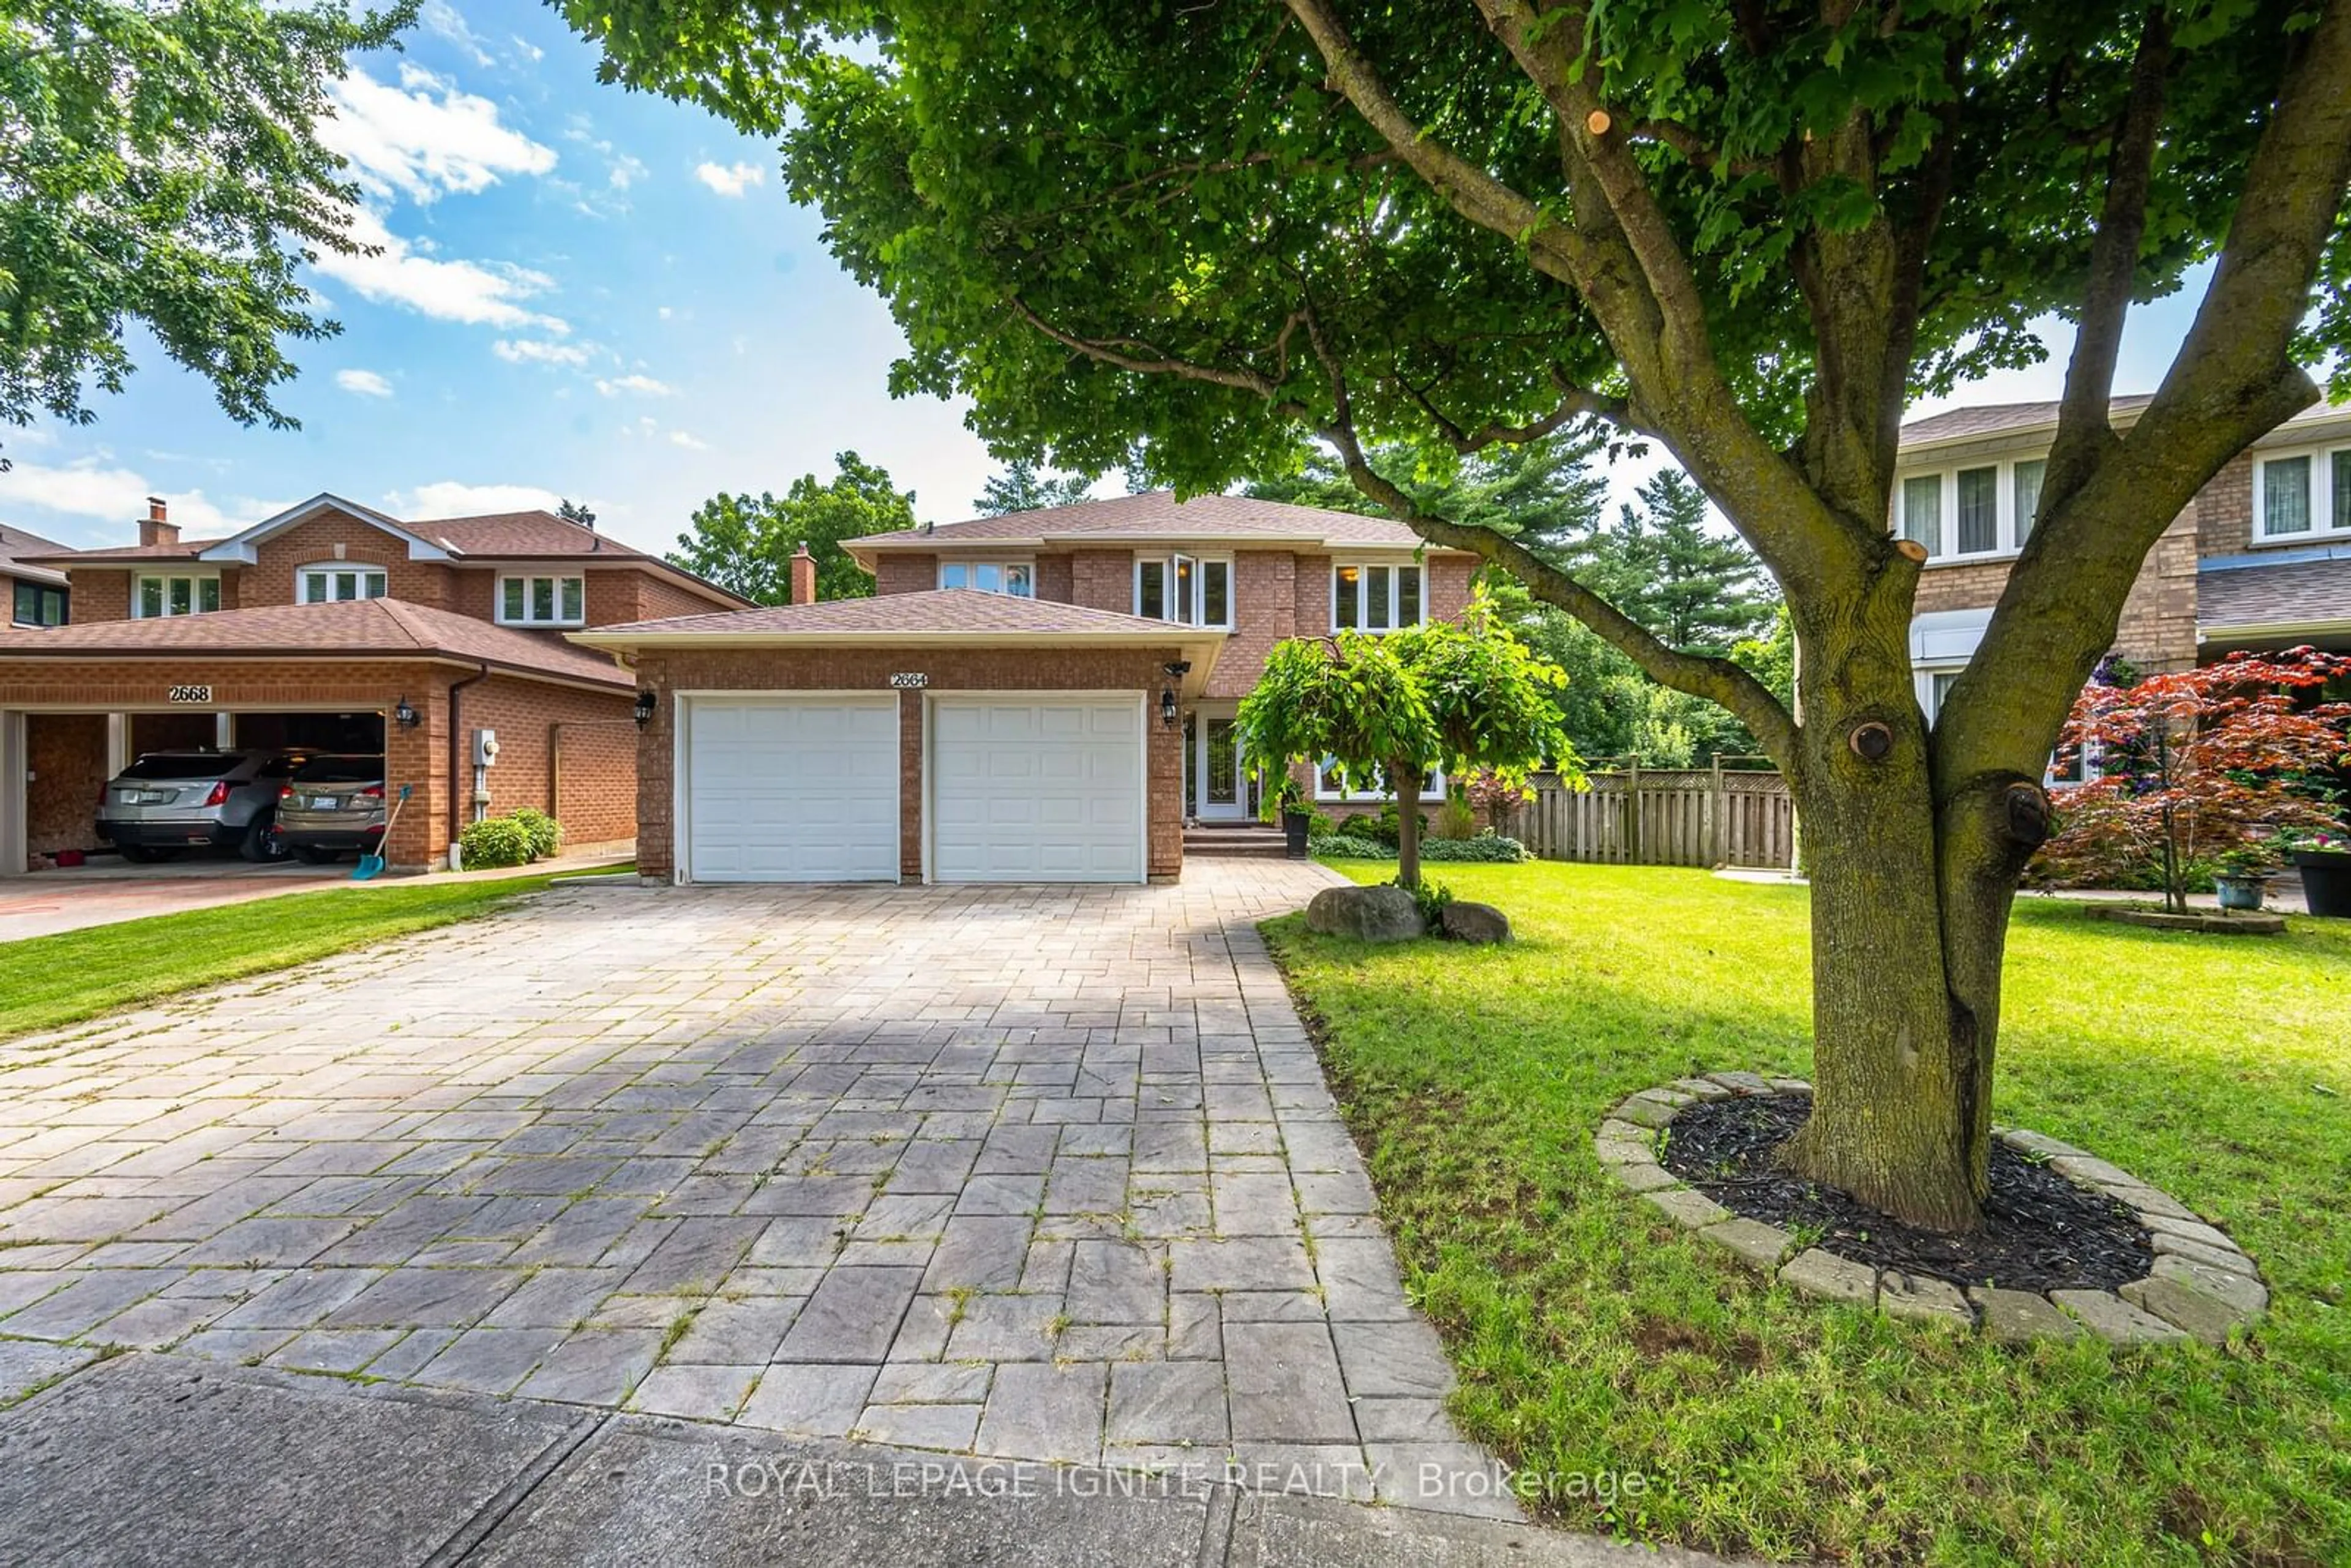 Home with brick exterior material for 2664 Fonthill Dr, Oakville Ontario L6J 7H5